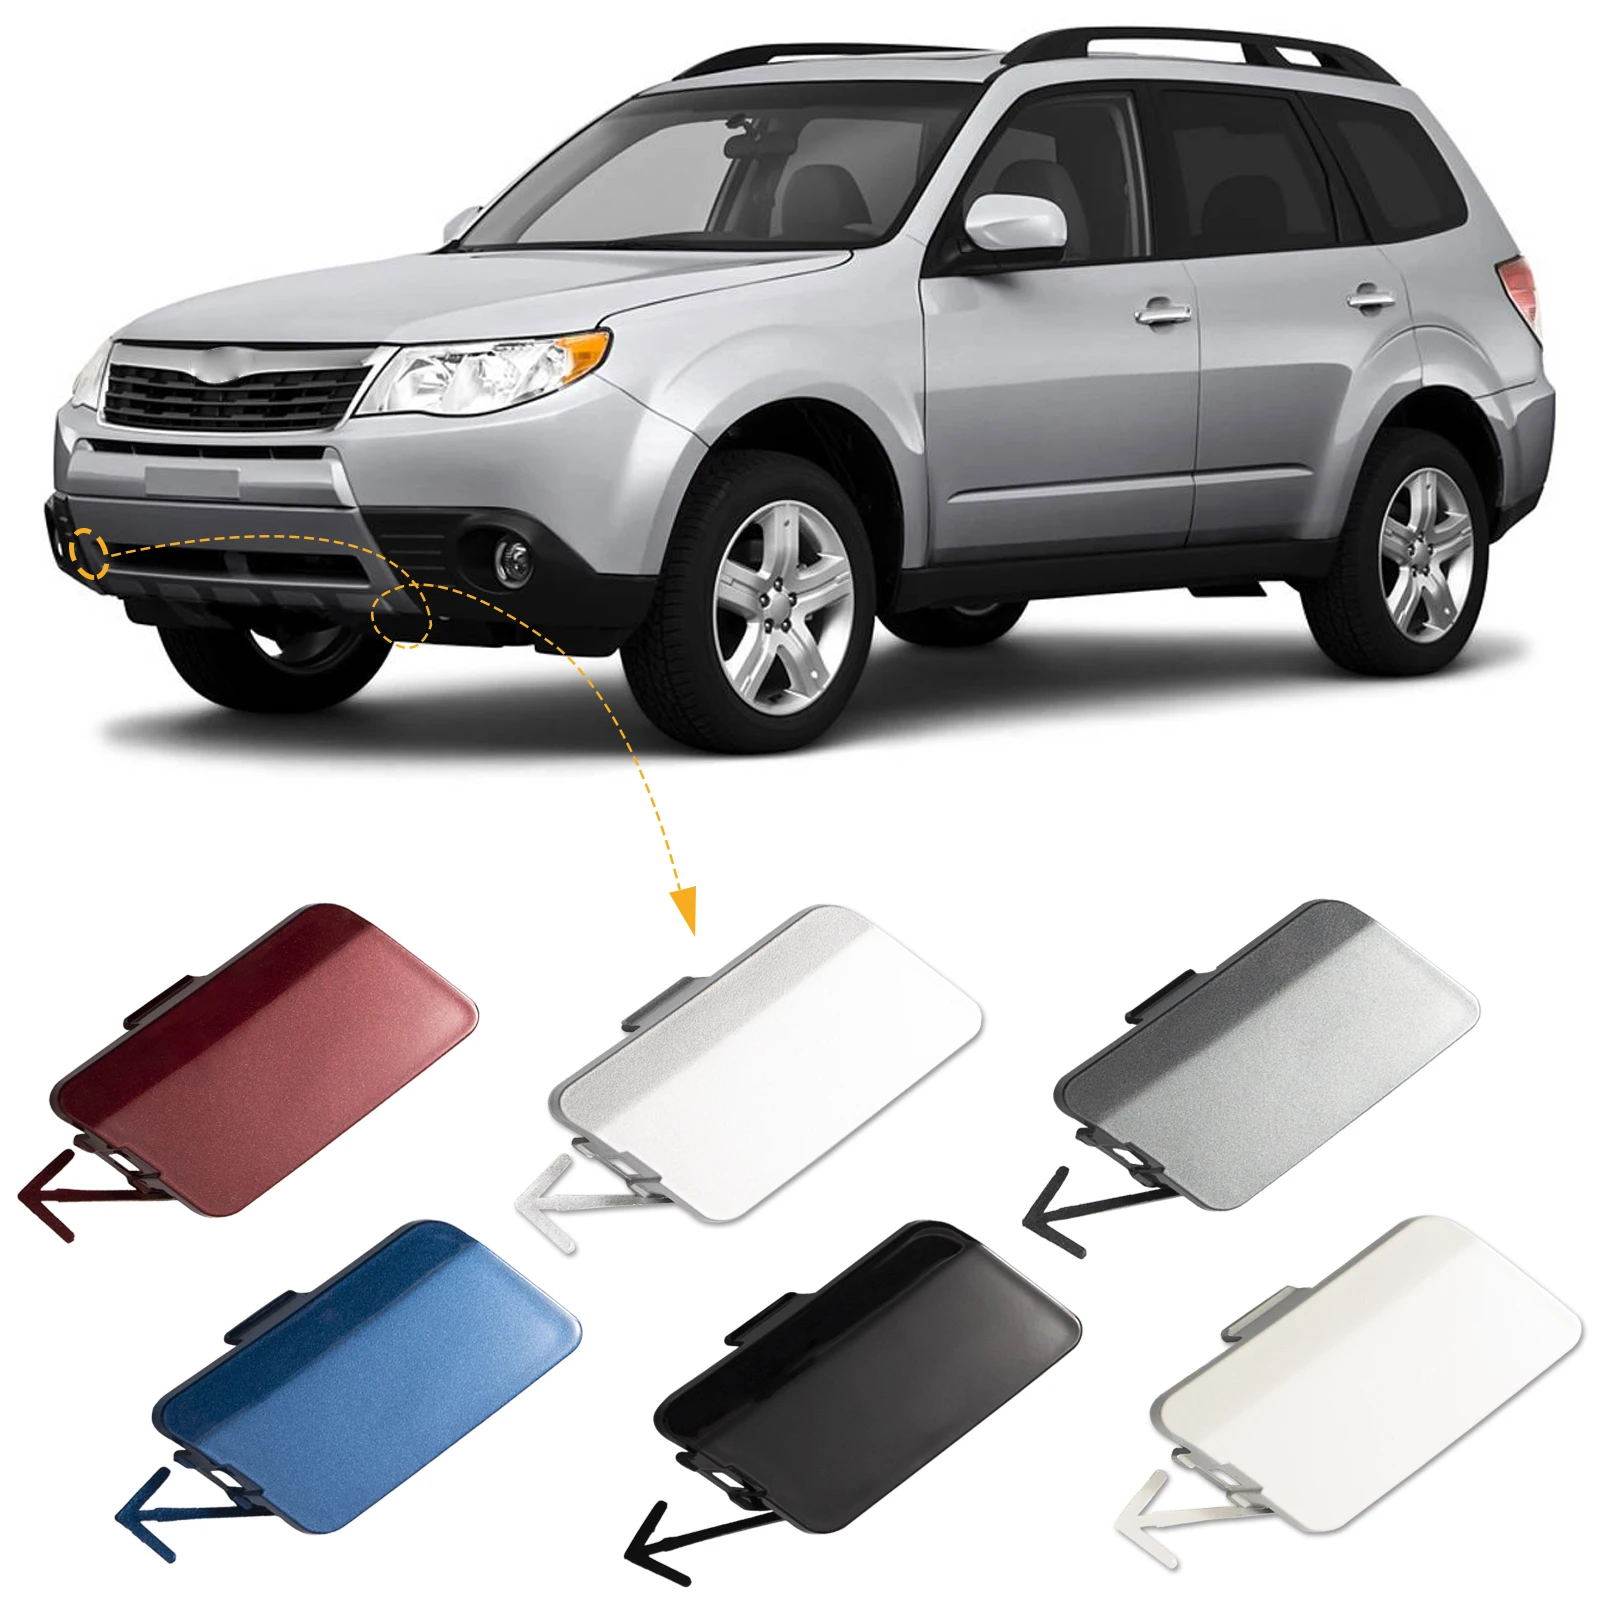 Front Bumper Tow Hook Cap Towing Eye Cover For Subaru Forester 2009-2013 - $15.75+